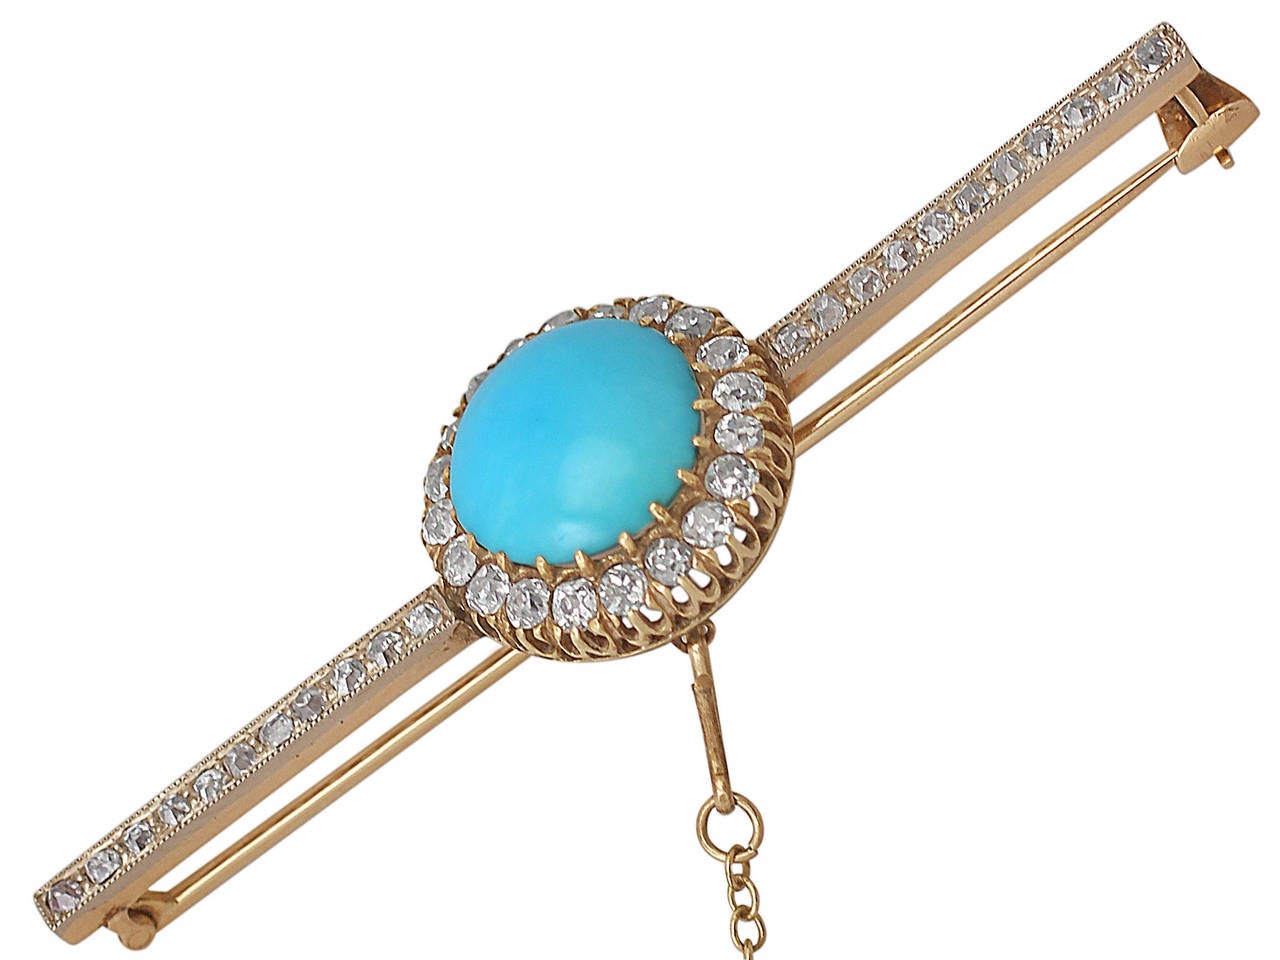 Women's Turquoise and 1.56 ct Diamond, 15l Yellow Gold Bar Brooch - Antique Circa 1880